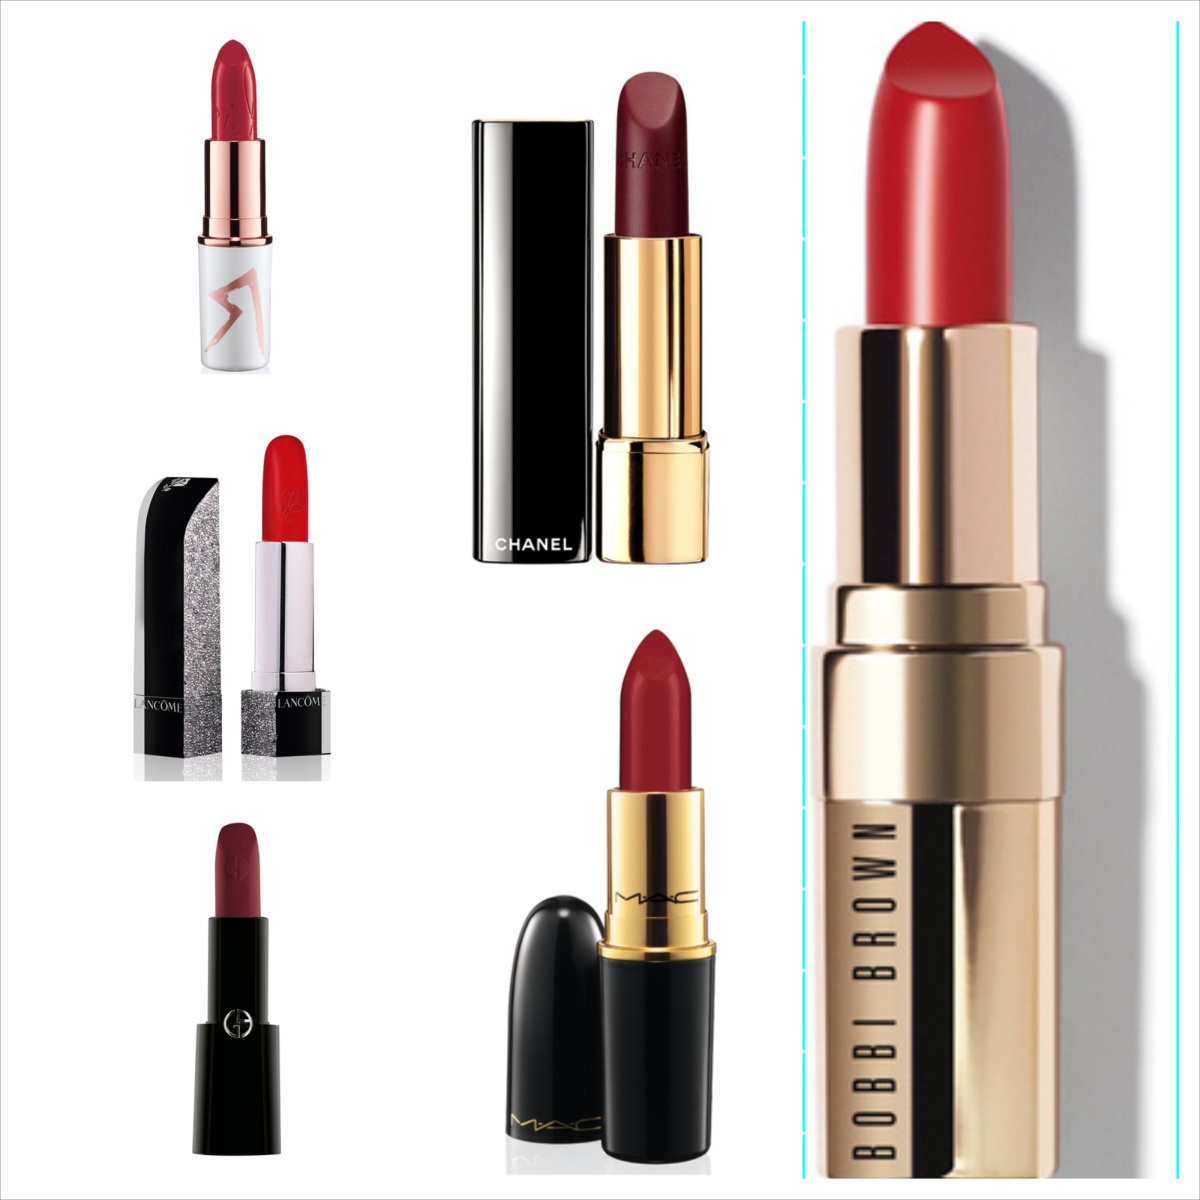 6 best red lipsticks from the Christmas 2013 collections